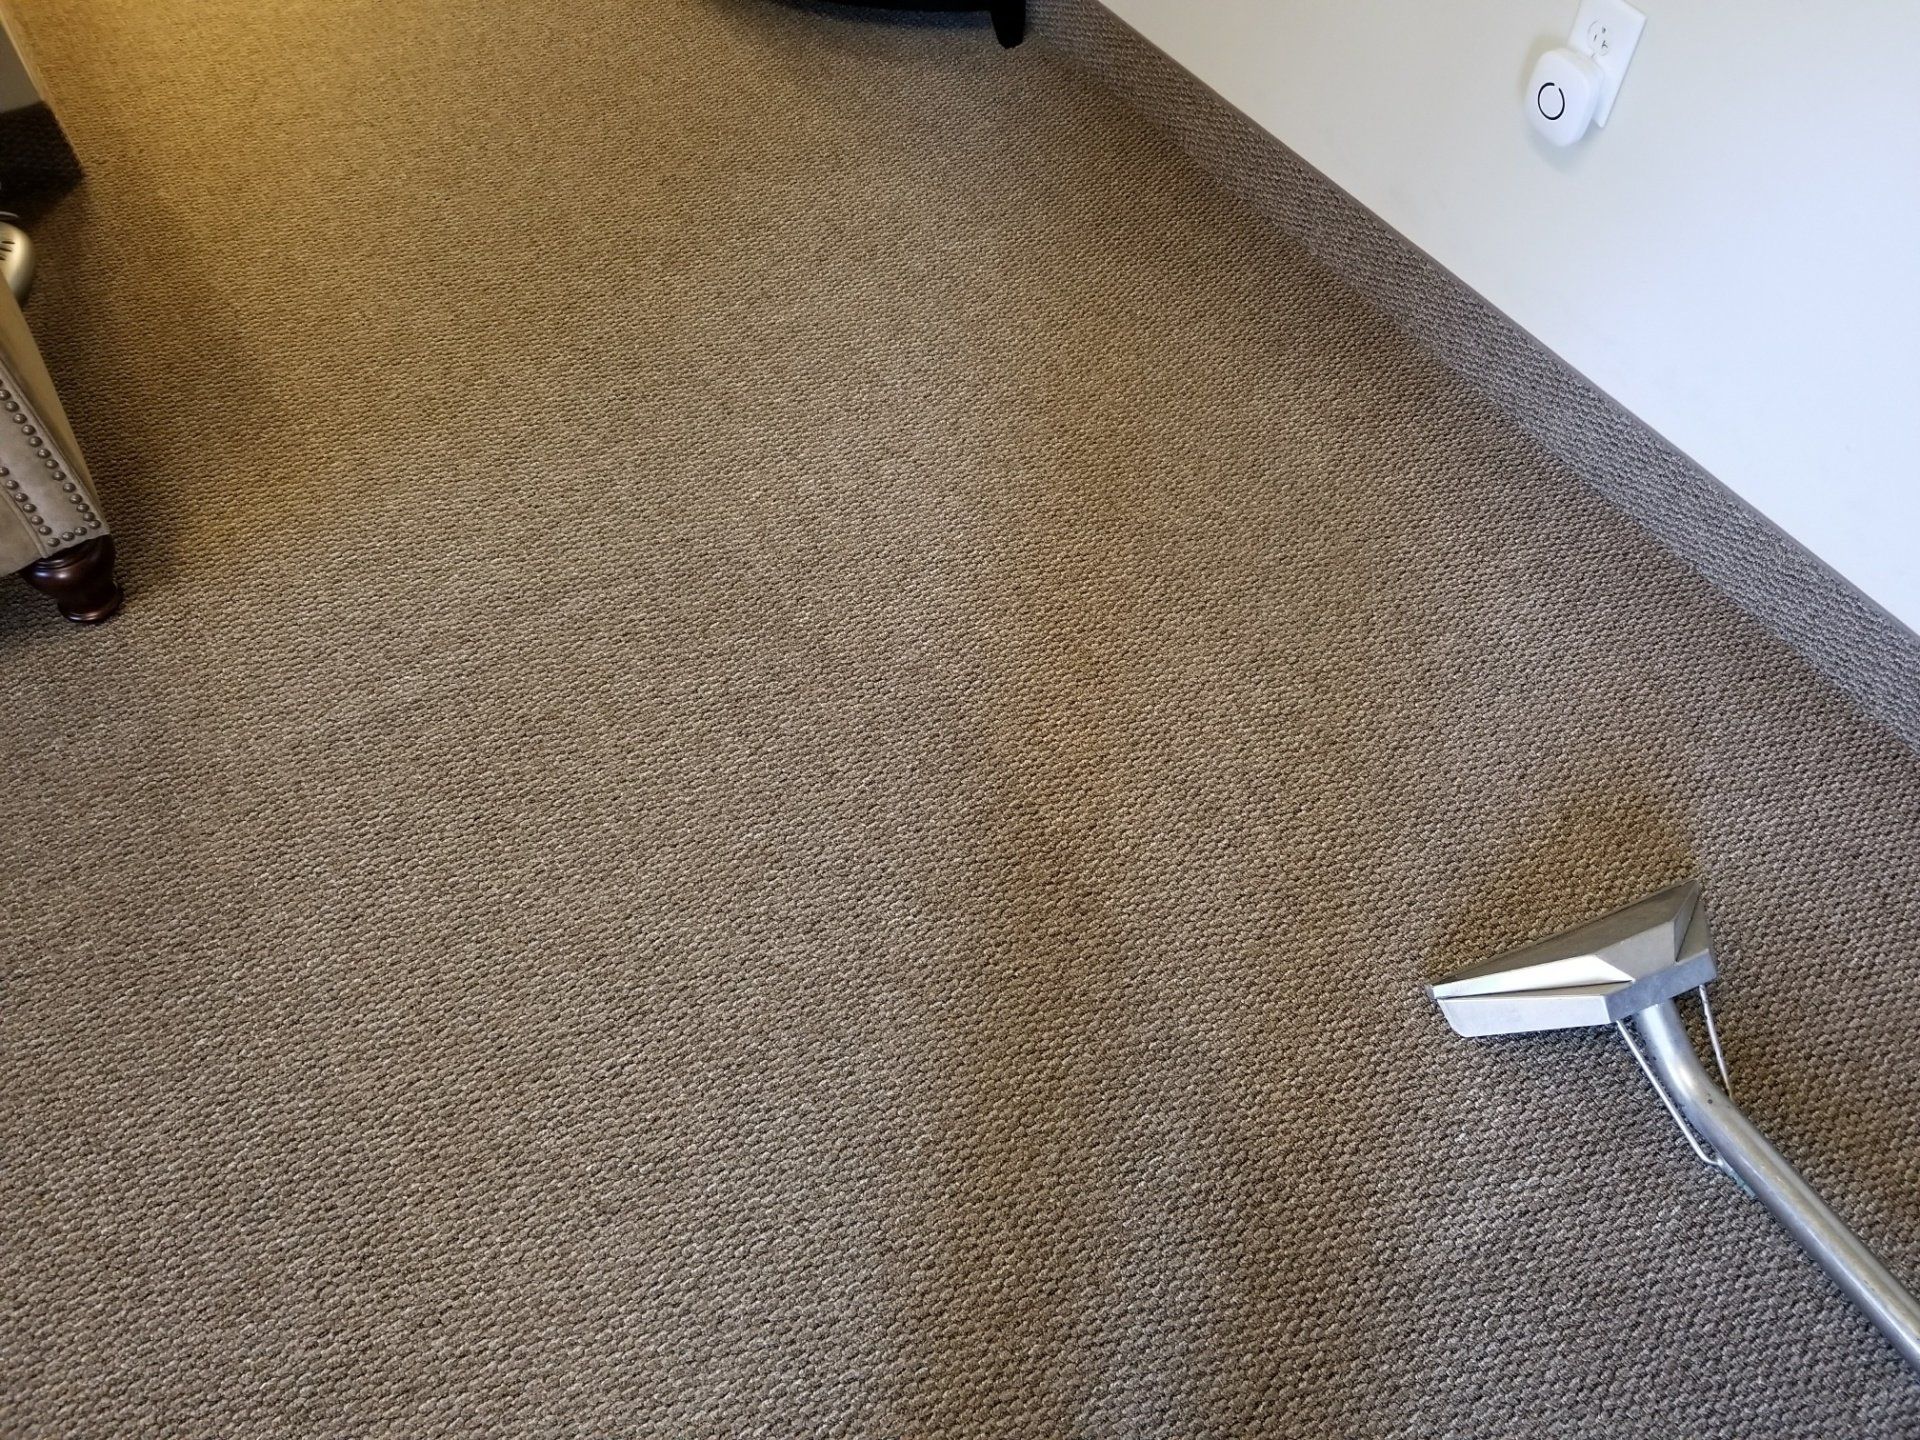 At Spotless Clean and Carpet Care, we’re known as providers of a clean you can count on